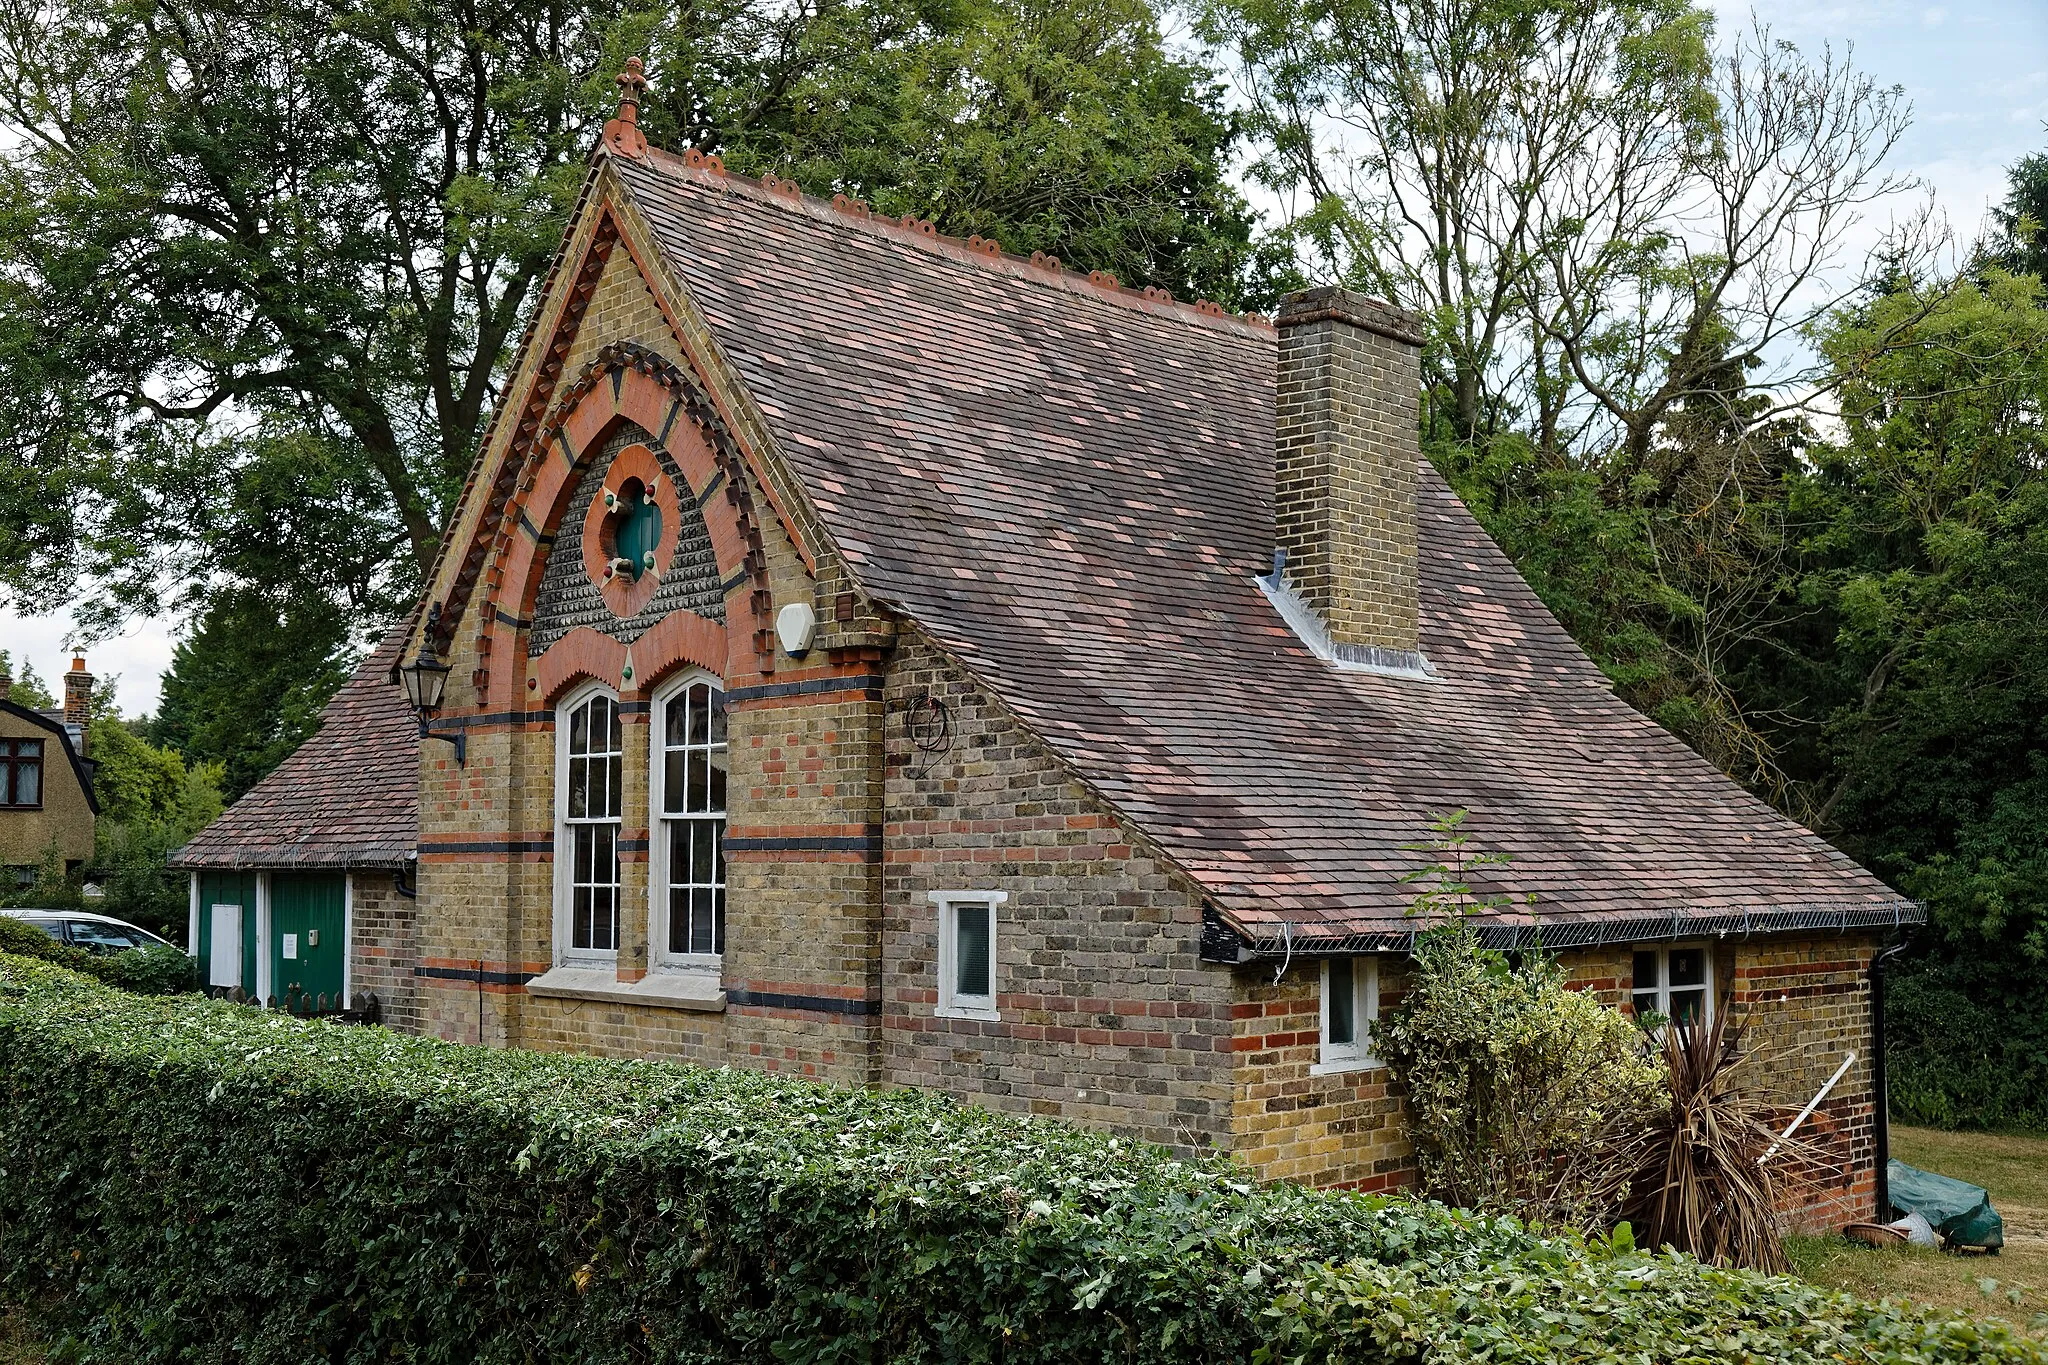 Photo showing: The Grade II listed 1882 parish rooms church hall originally built to accommodate a Sunday School for the Church of St Alban the Martyr, at the point where Coopersale Common Road becomes Houblons Hill in Coopersale, in the civil parish of Epping, Essex, England. Camera: Canon EOS 6D Mark II with Canon EF 24-105mm F4L IS USM lens. Software: File lens-corrected, optimized, perhaps cropped, with DxO PhotoLab, and likely further optimized with Adobe Photoshop CS2.